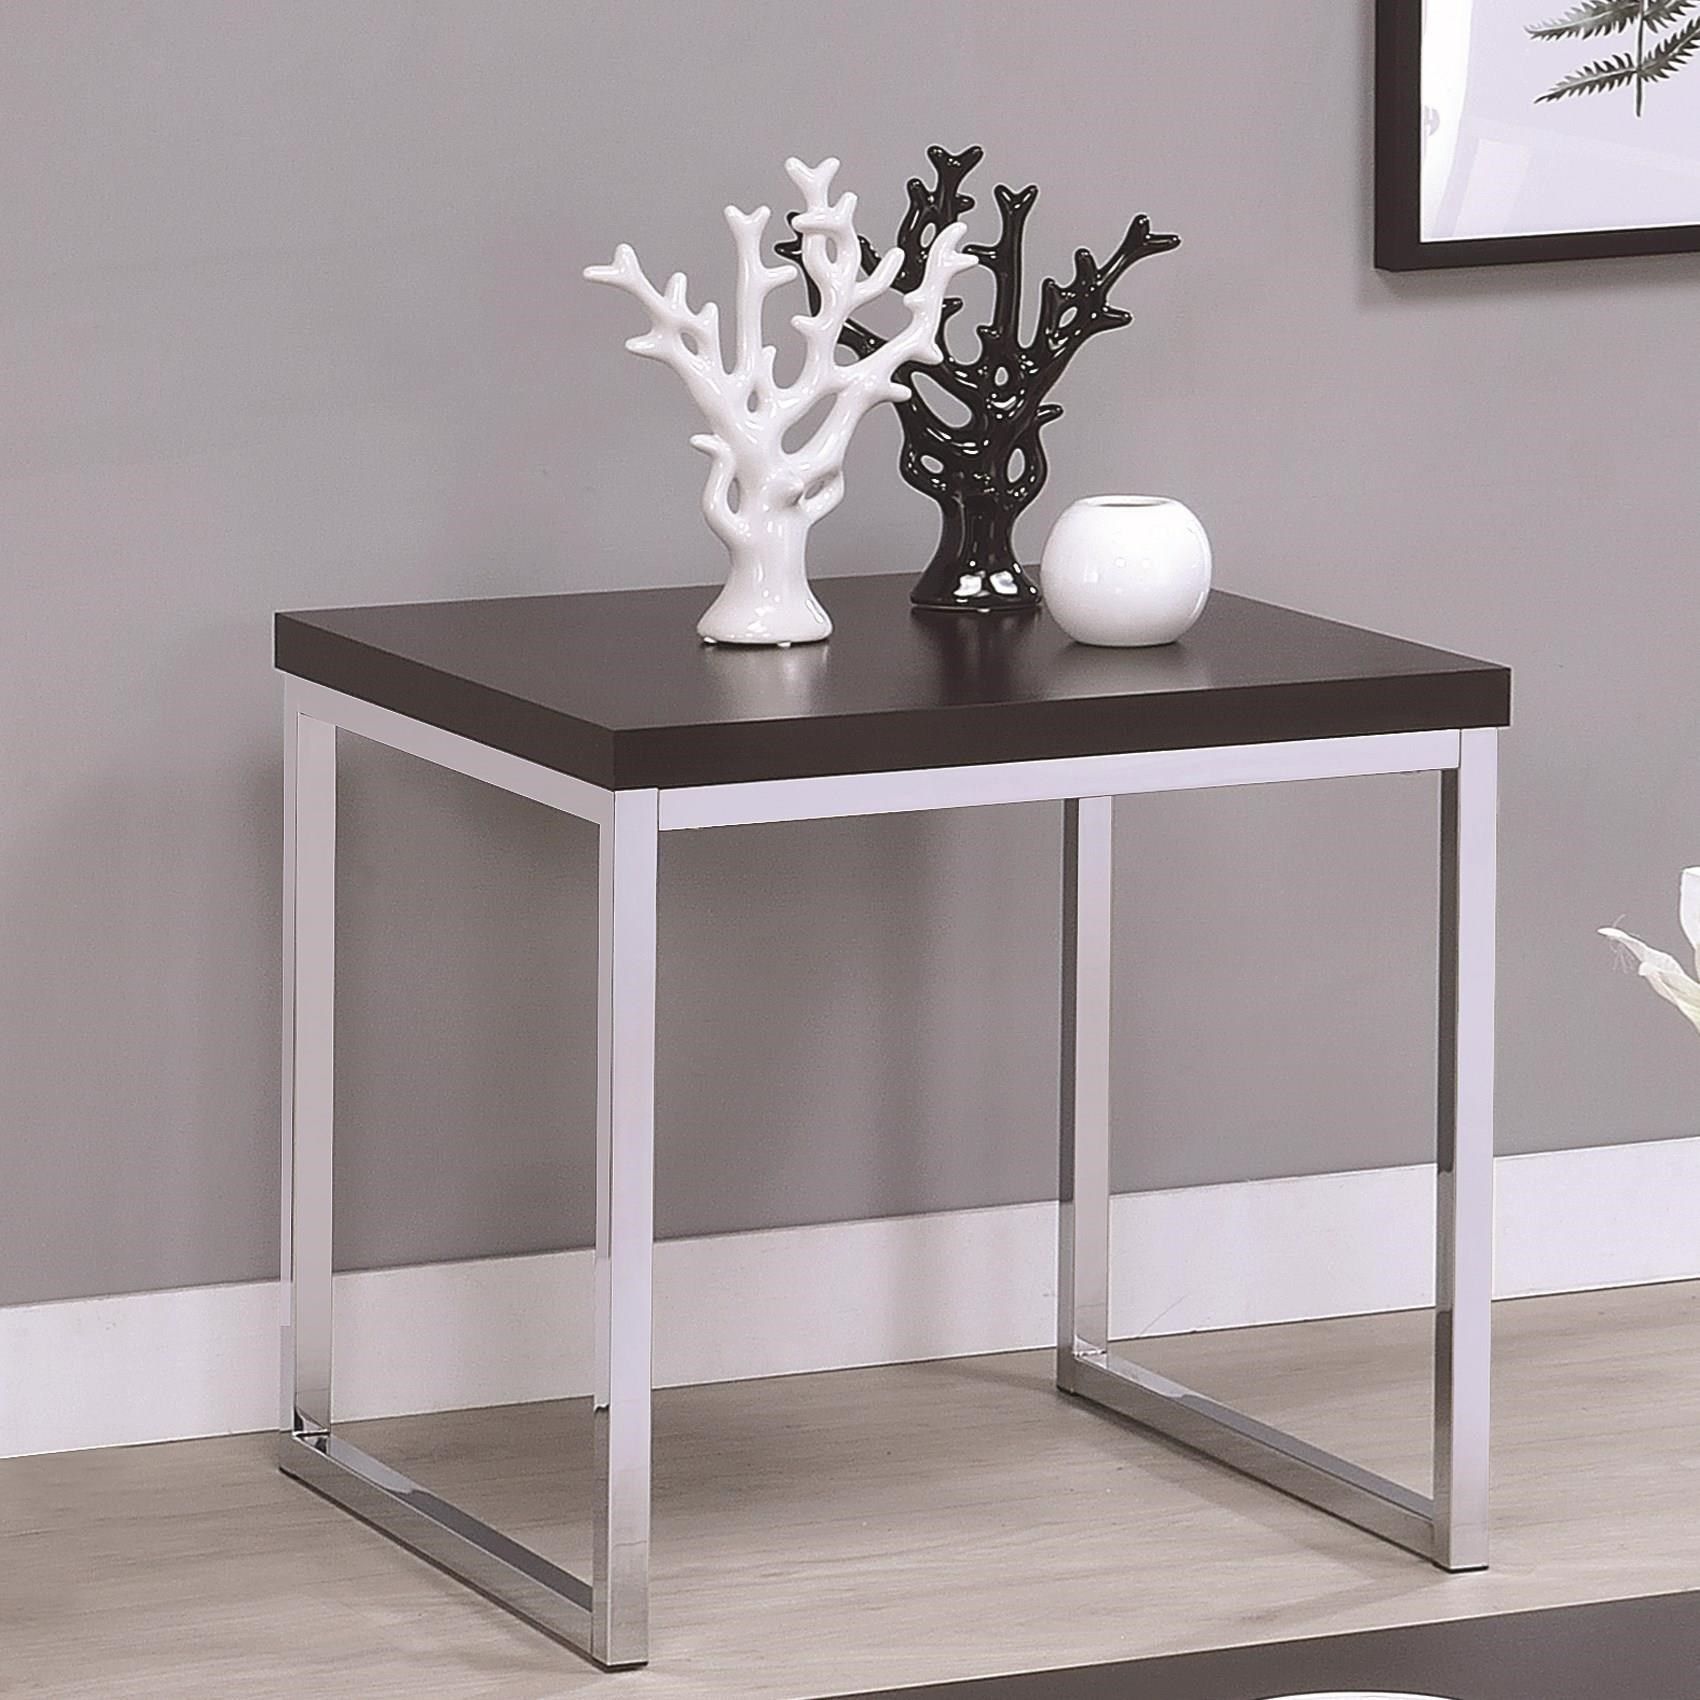 72102 Contemporary Square End Table | Quality Furniture At Inside Square Matte Black Console Tables (View 13 of 20)